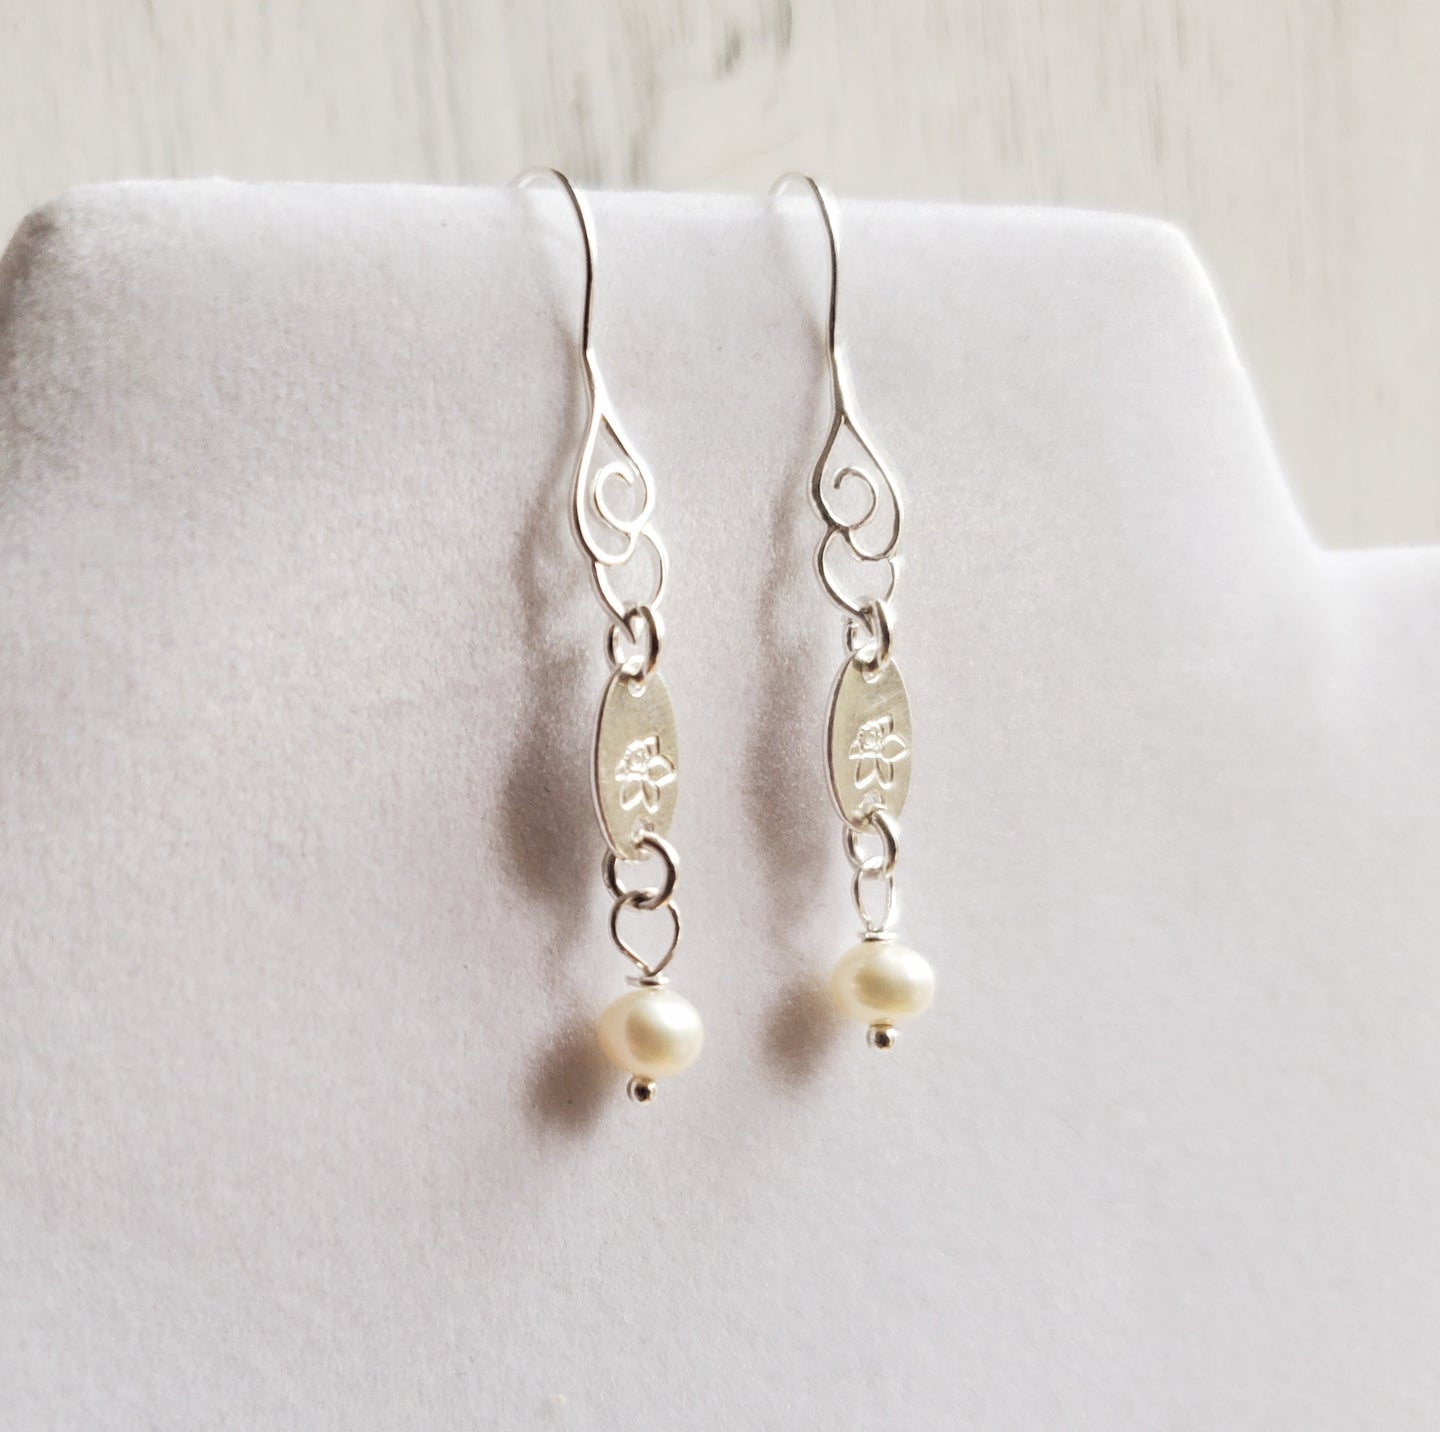 sterling silver hook earrings with swirl pattern, freshwater pearls, and disc stamped with birth flower